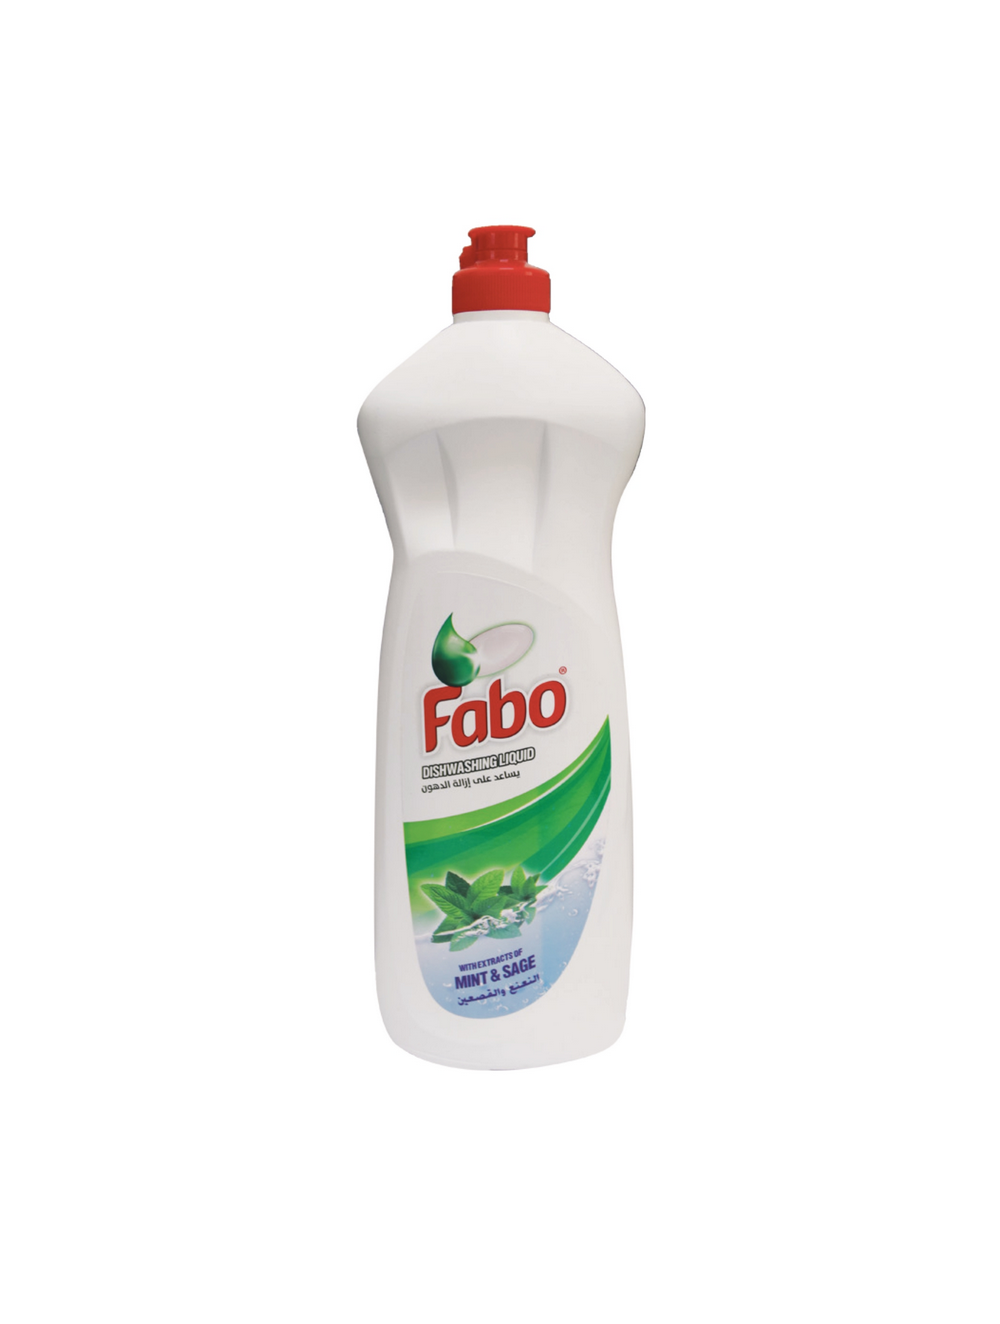 fabo-products_page-0023